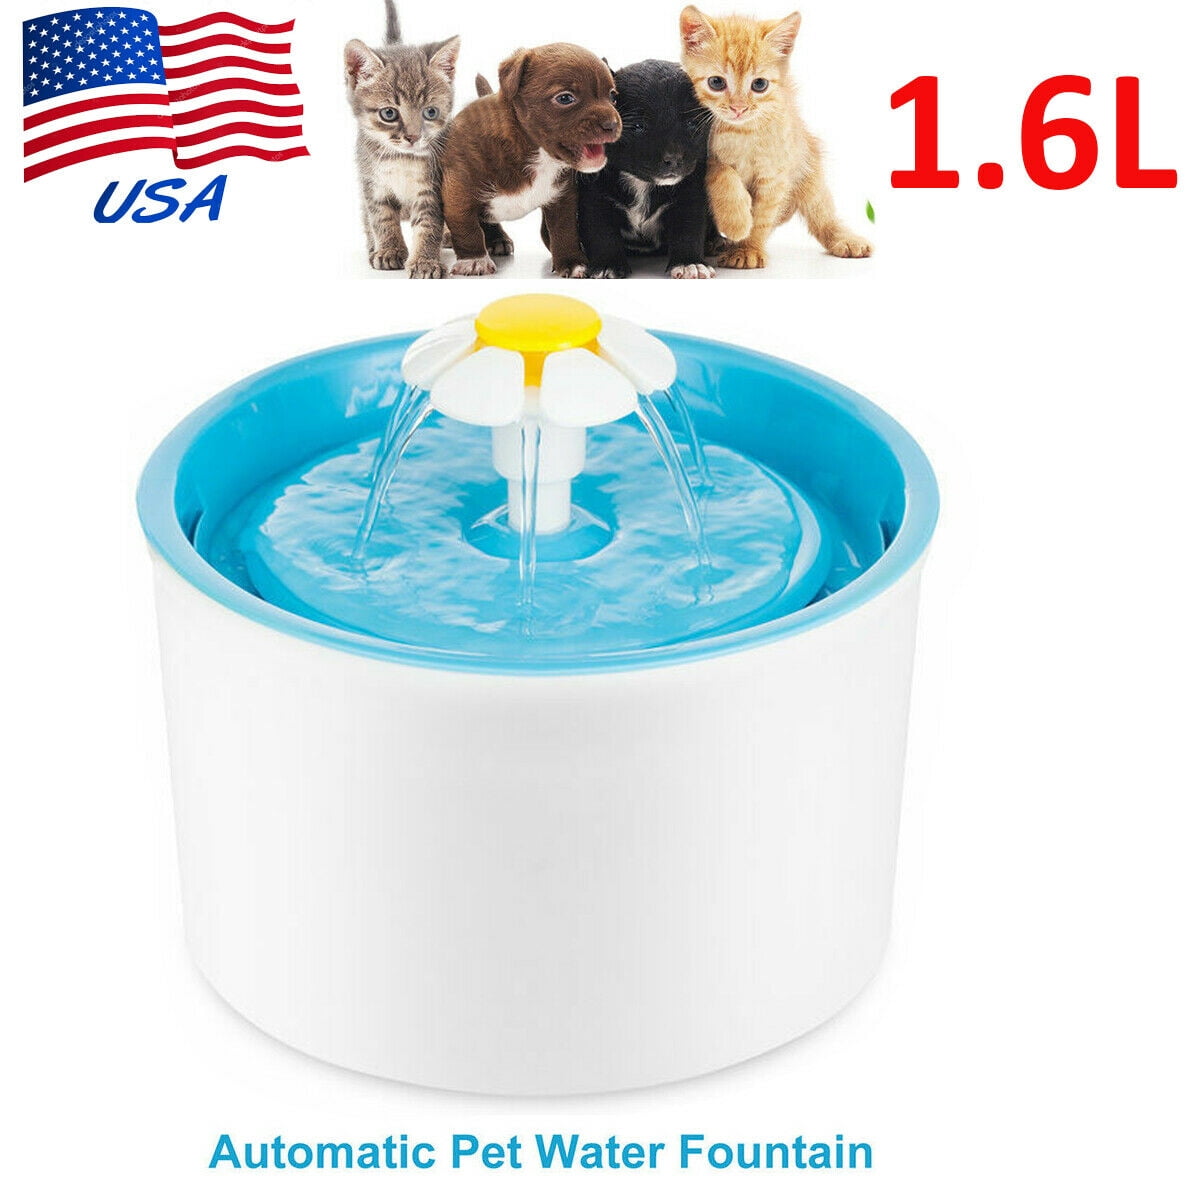 AUTOMATIC CAT DOG WATER DRINKING FLOWER FOUNTAIN PET BOWL DRINK DISH FILTER 